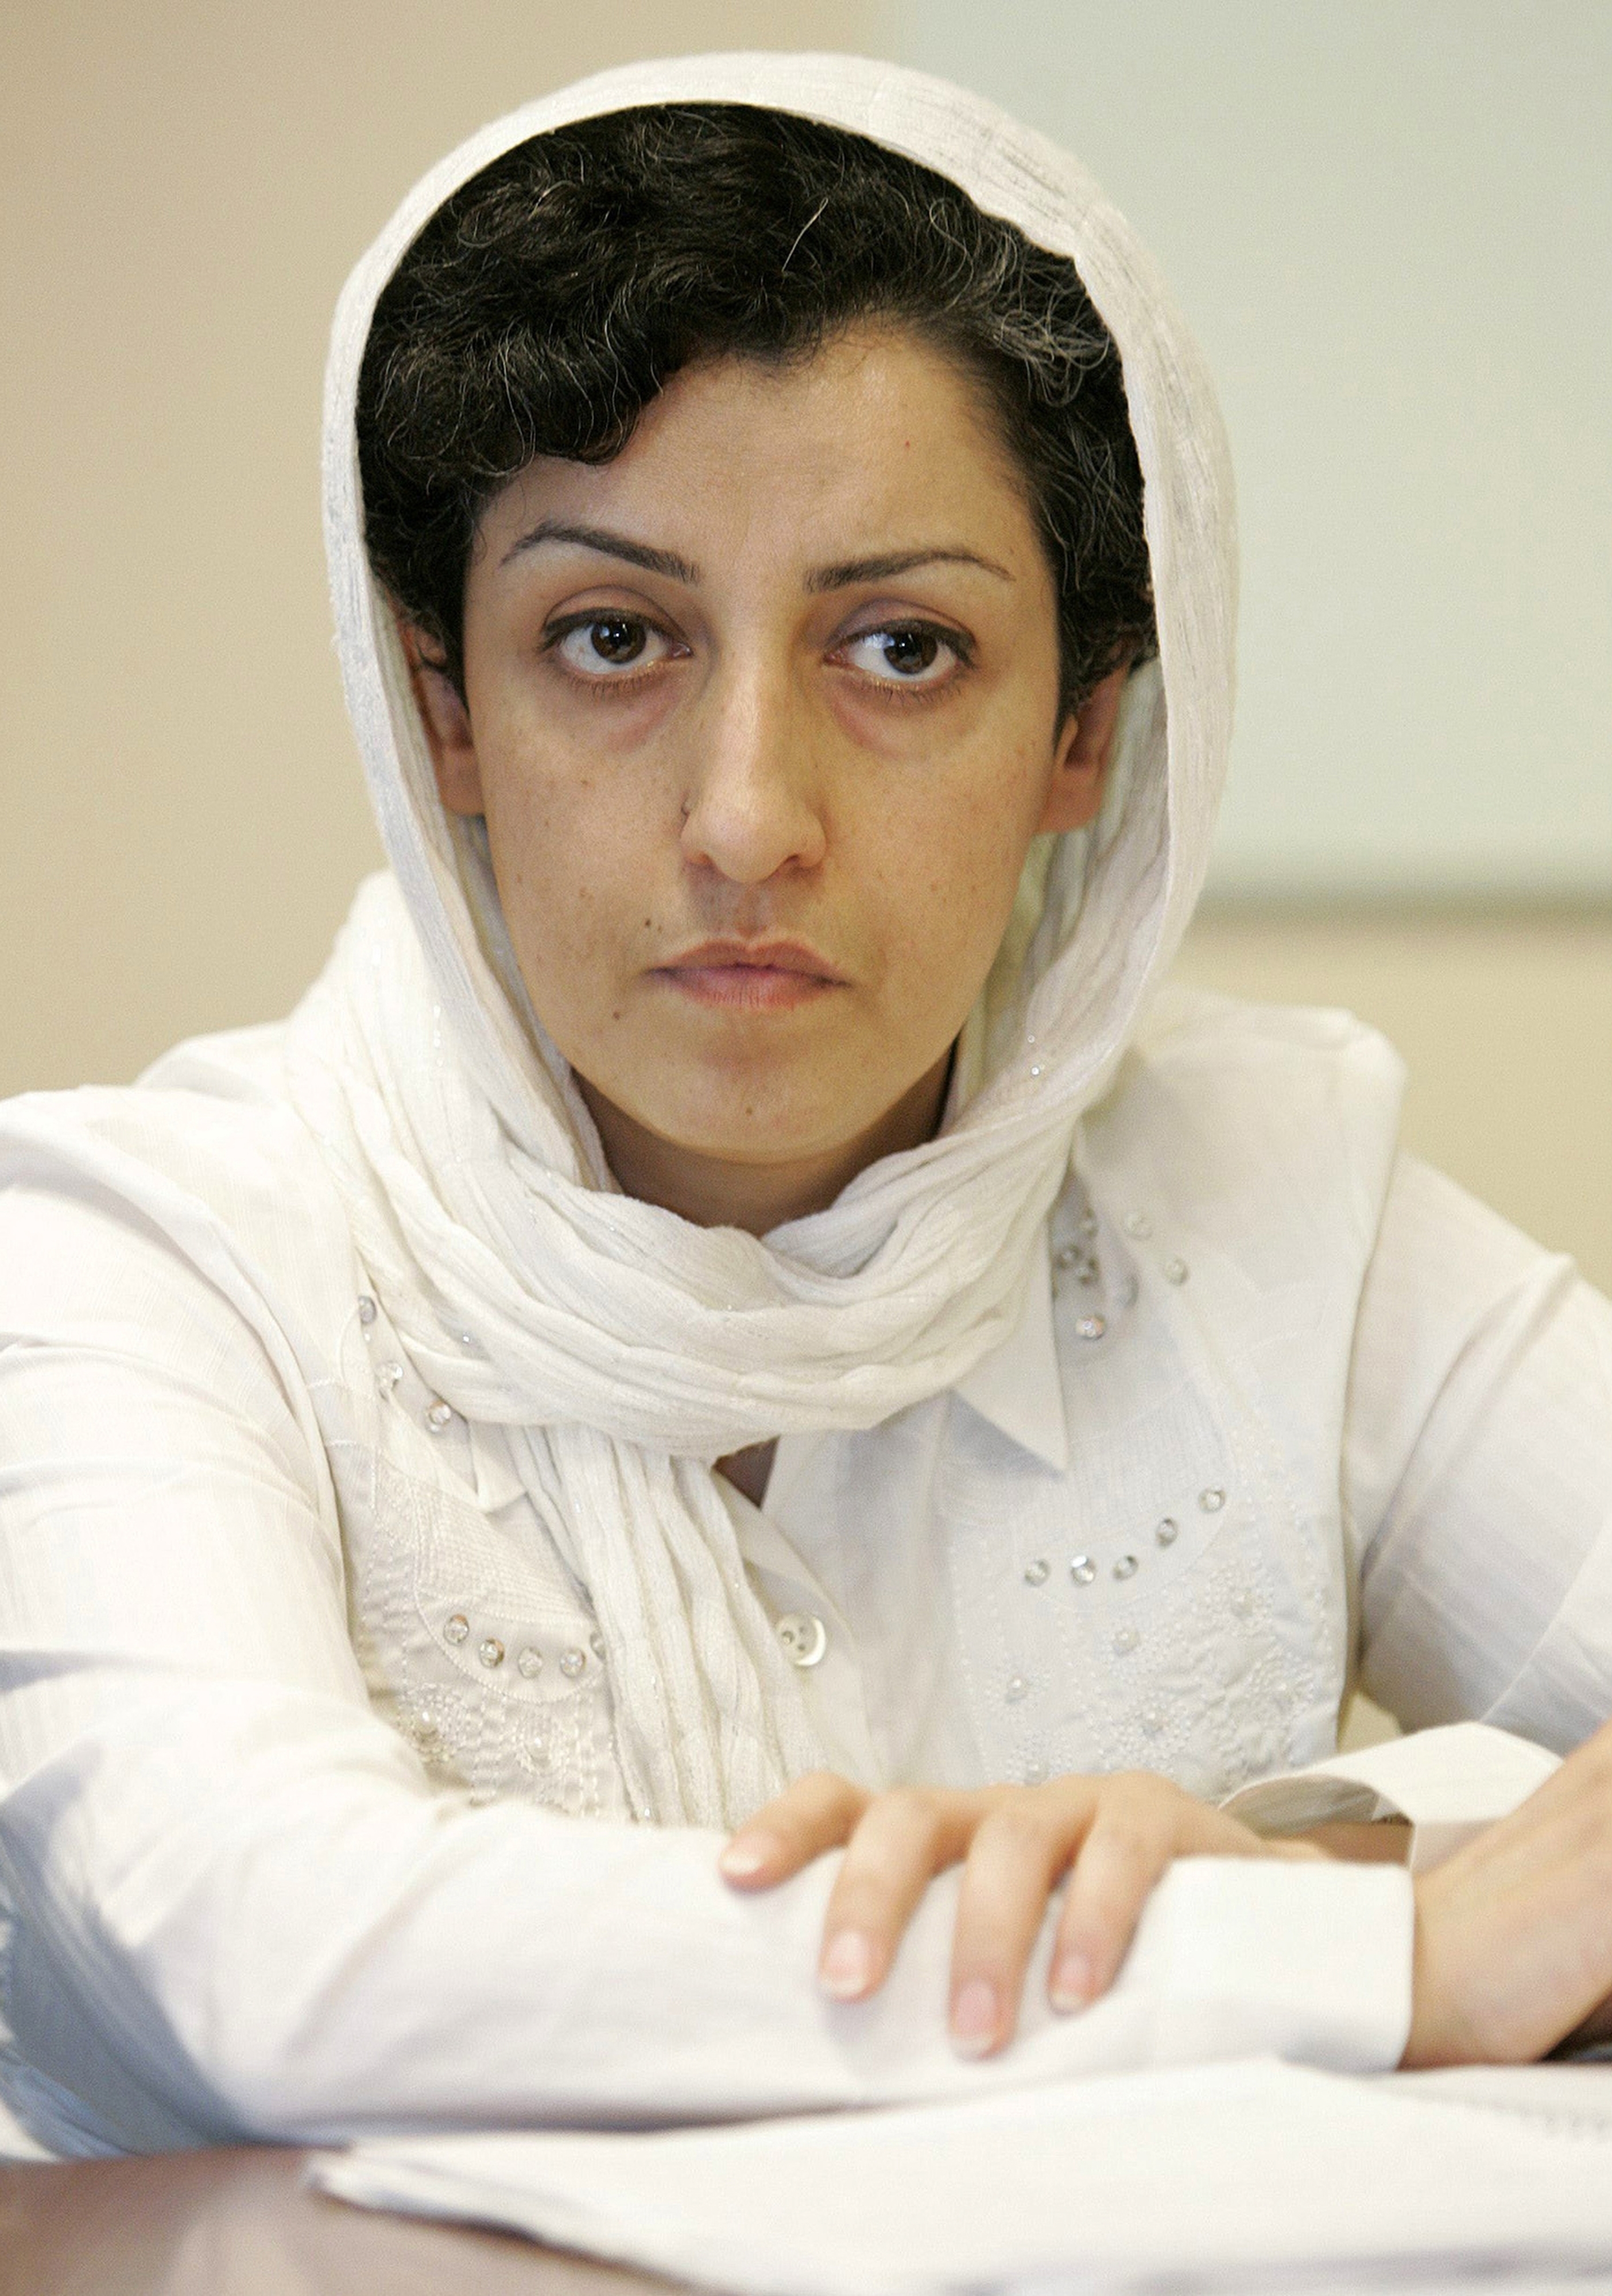 Woman in white, including white hijab, looks sternly at the camera. 